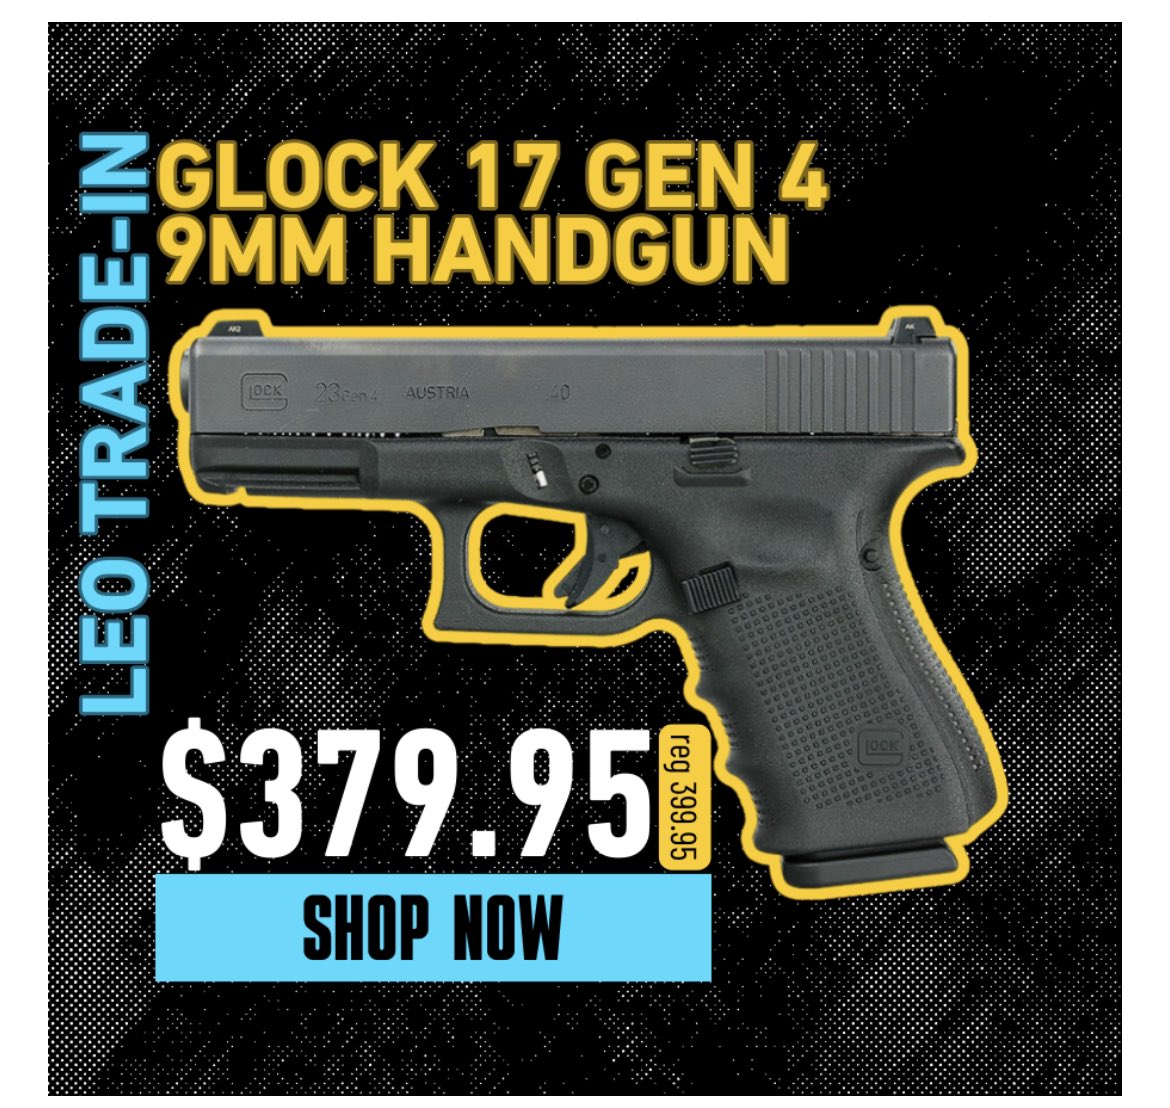 Rock hard Glock deal at AimSurplus

-7DeadlyFetishes